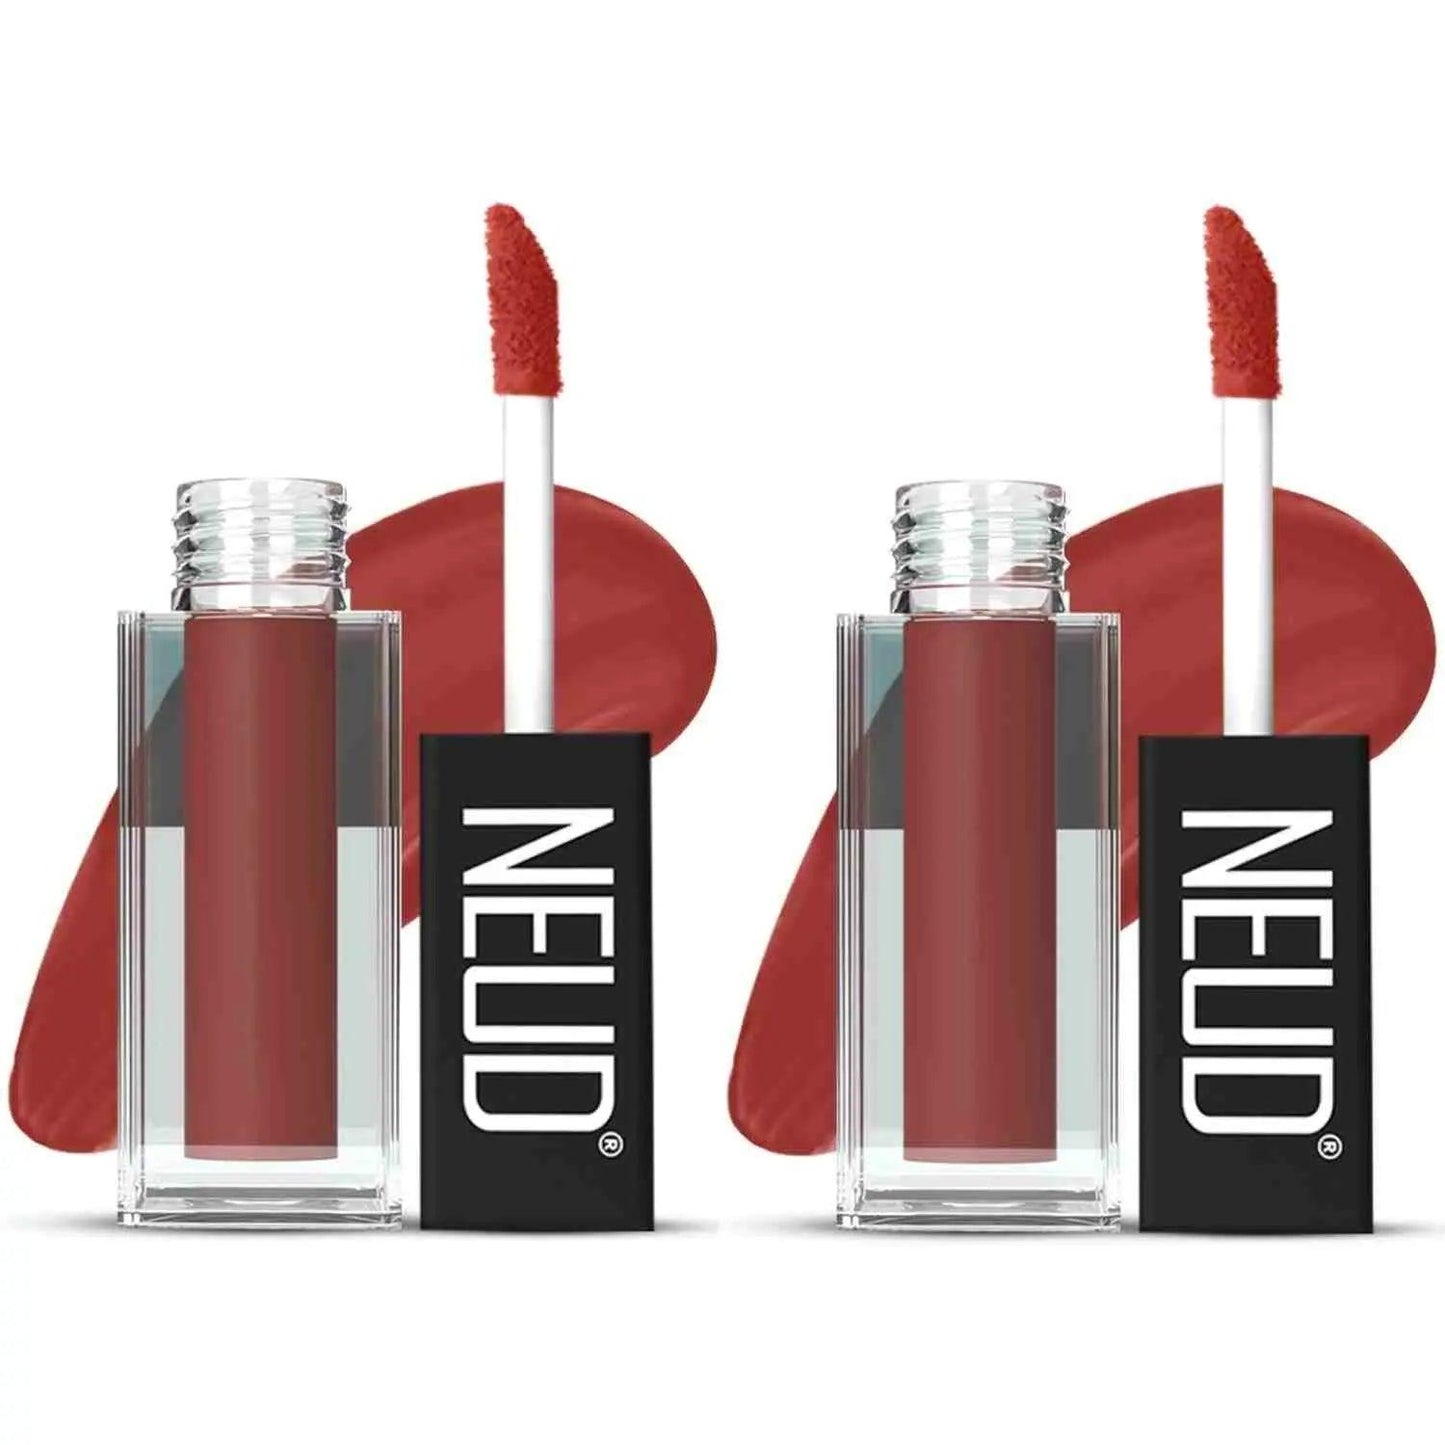 NEUD Matte Liquid Lipstick Jolly Coral with Jojoba Oil, Vitamin E and Almond Oil - Smudge Proof 12-hour Stay Formula with Free Lip Gloss 7419870799854